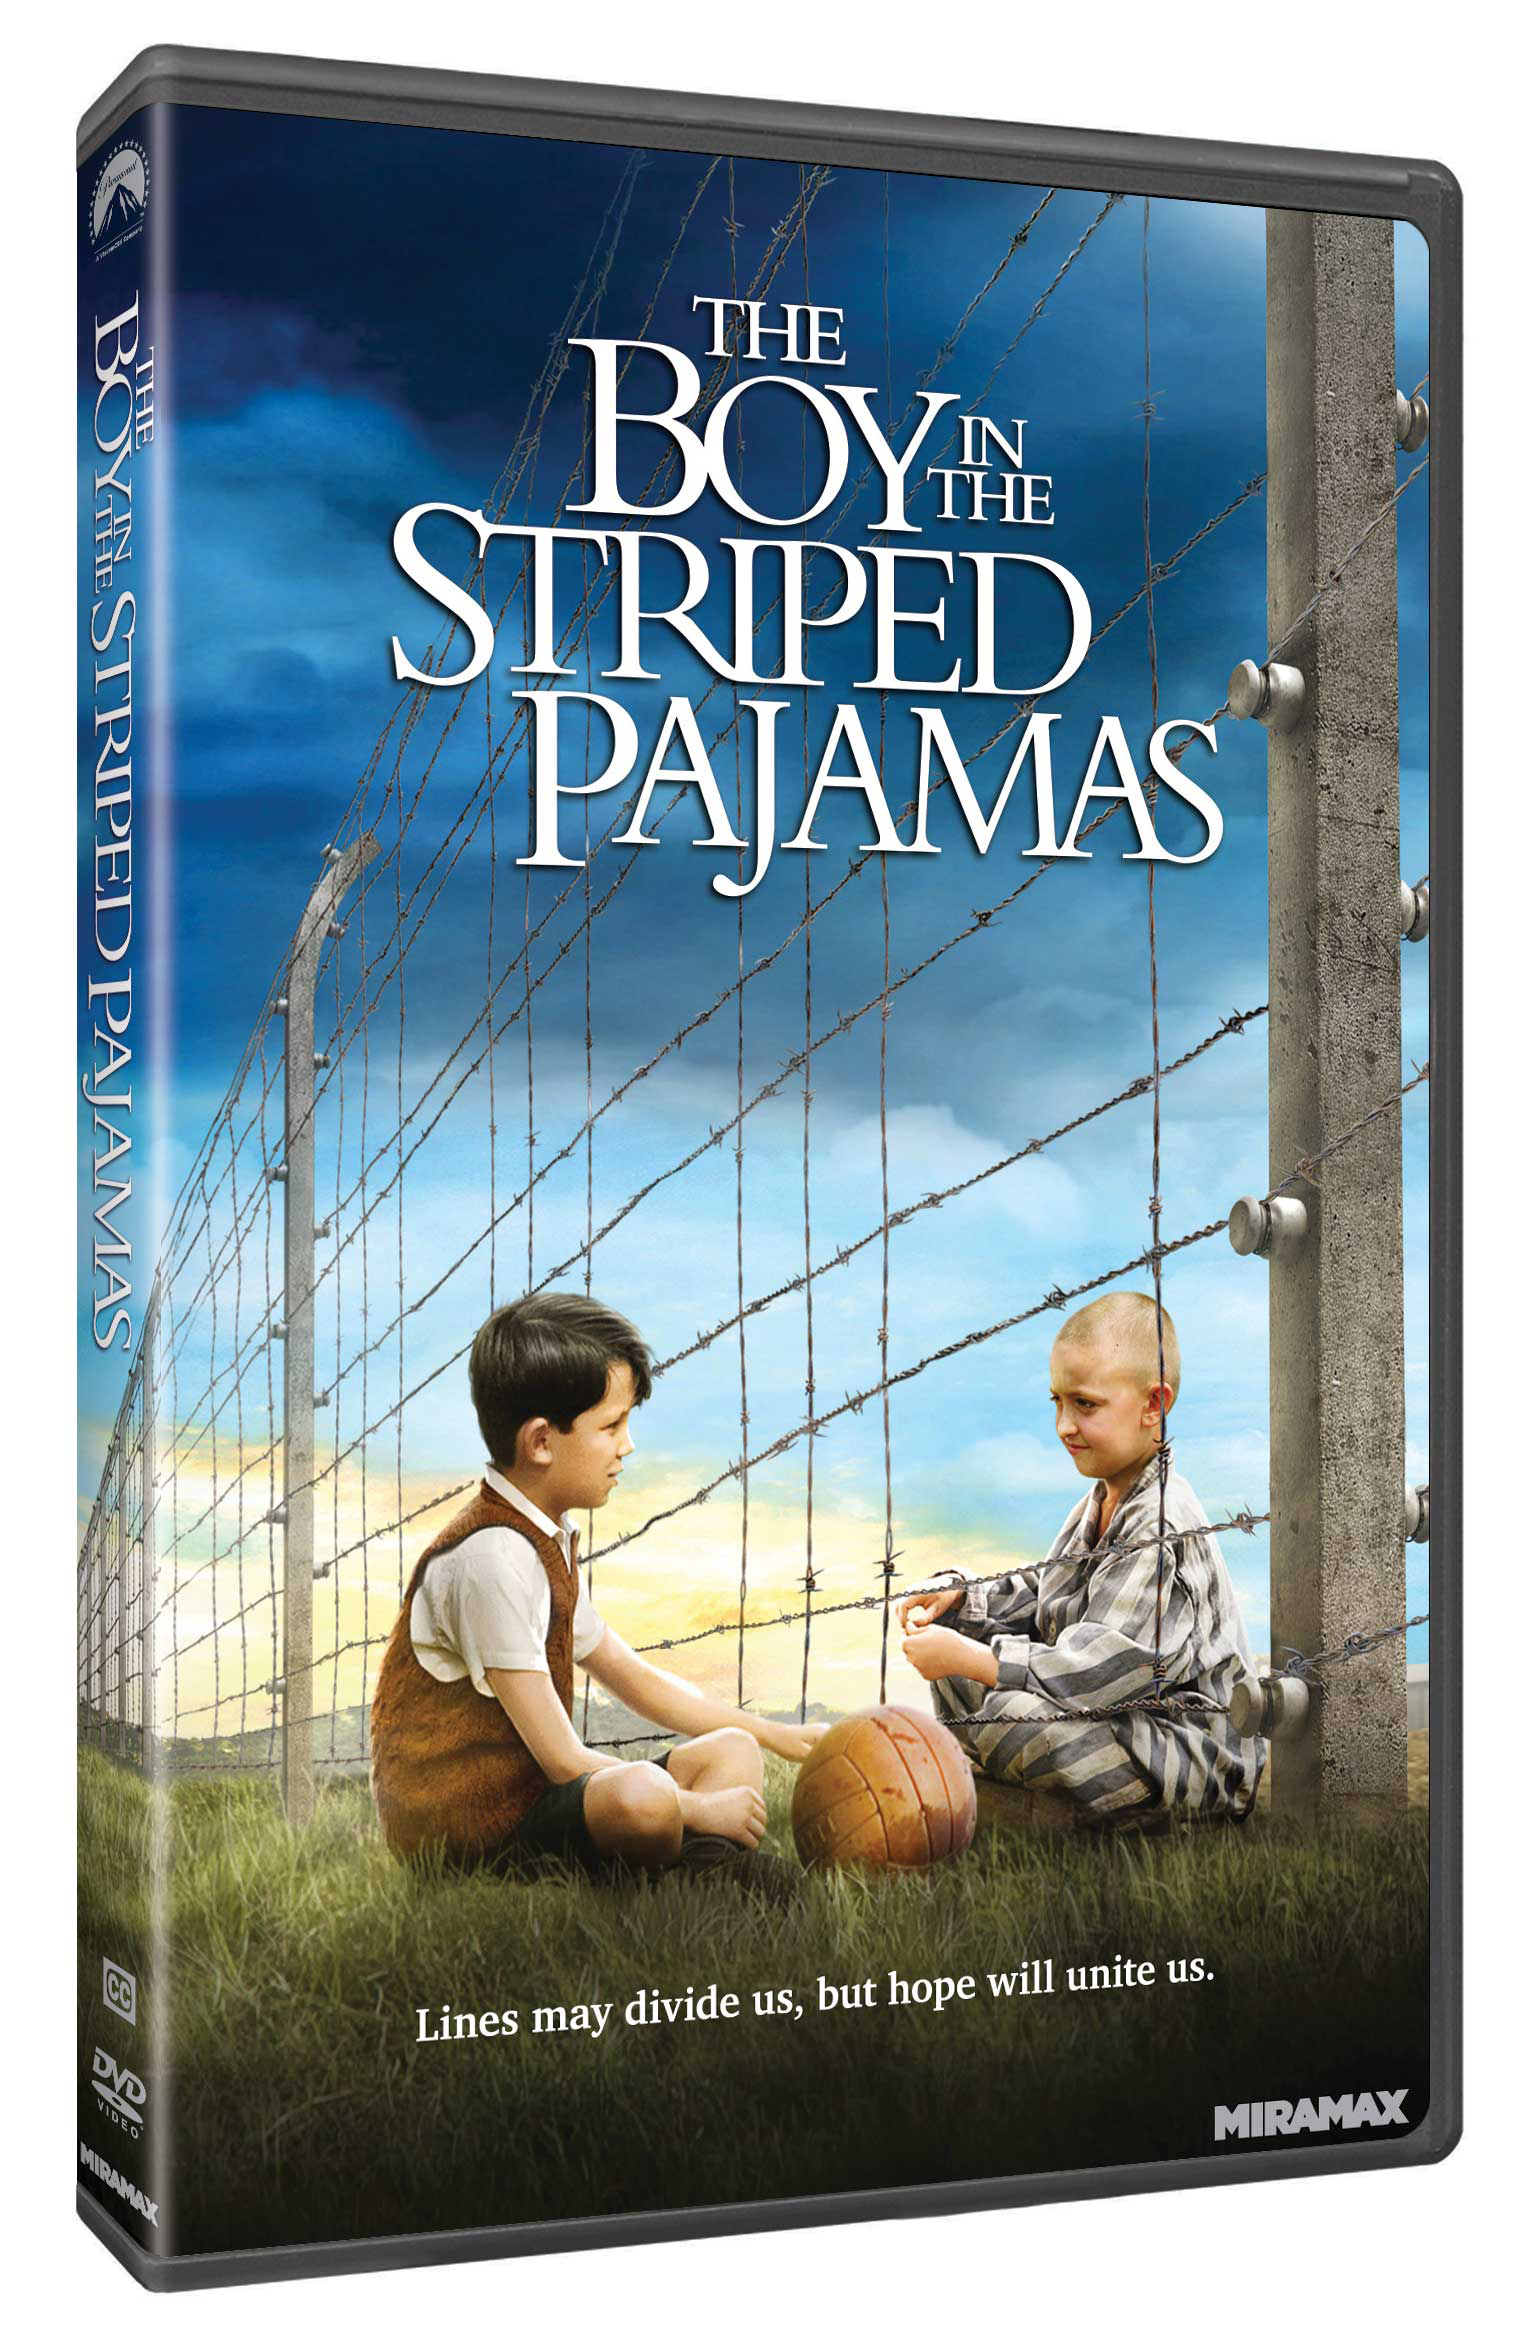 Text Review: The Boy in the Striped Pajamas